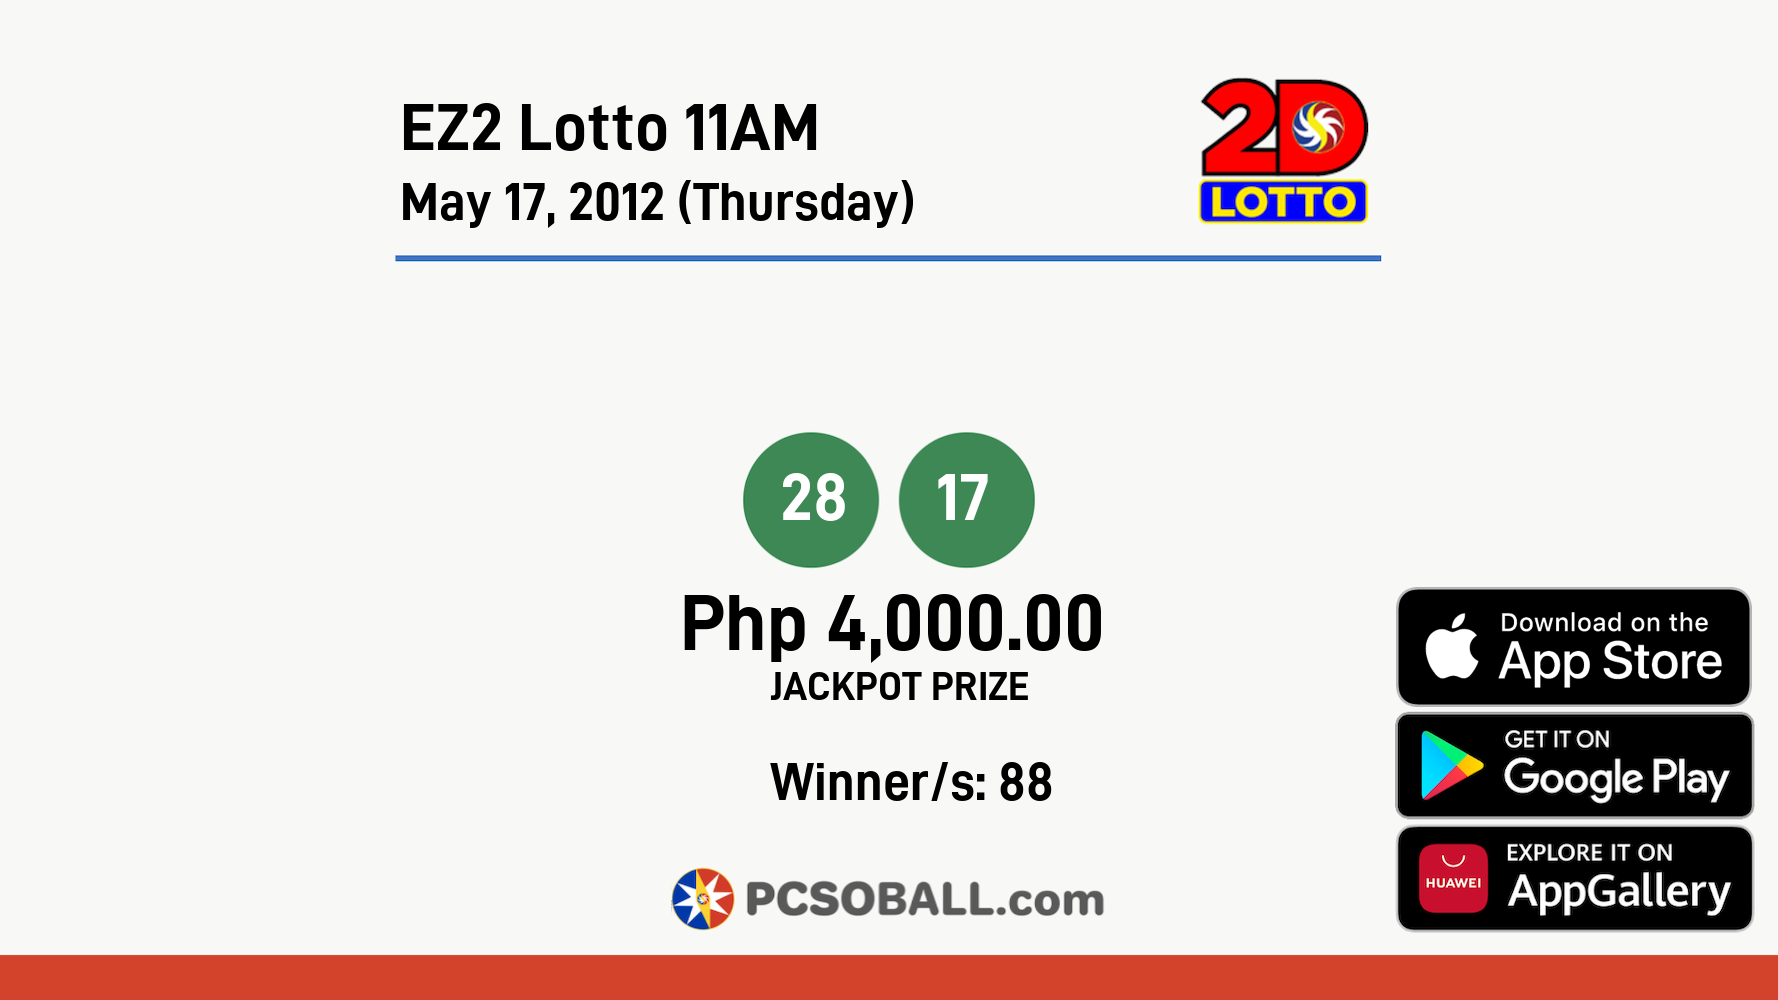 EZ2 Lotto 11AM May 17, 2012 (Thursday) Result